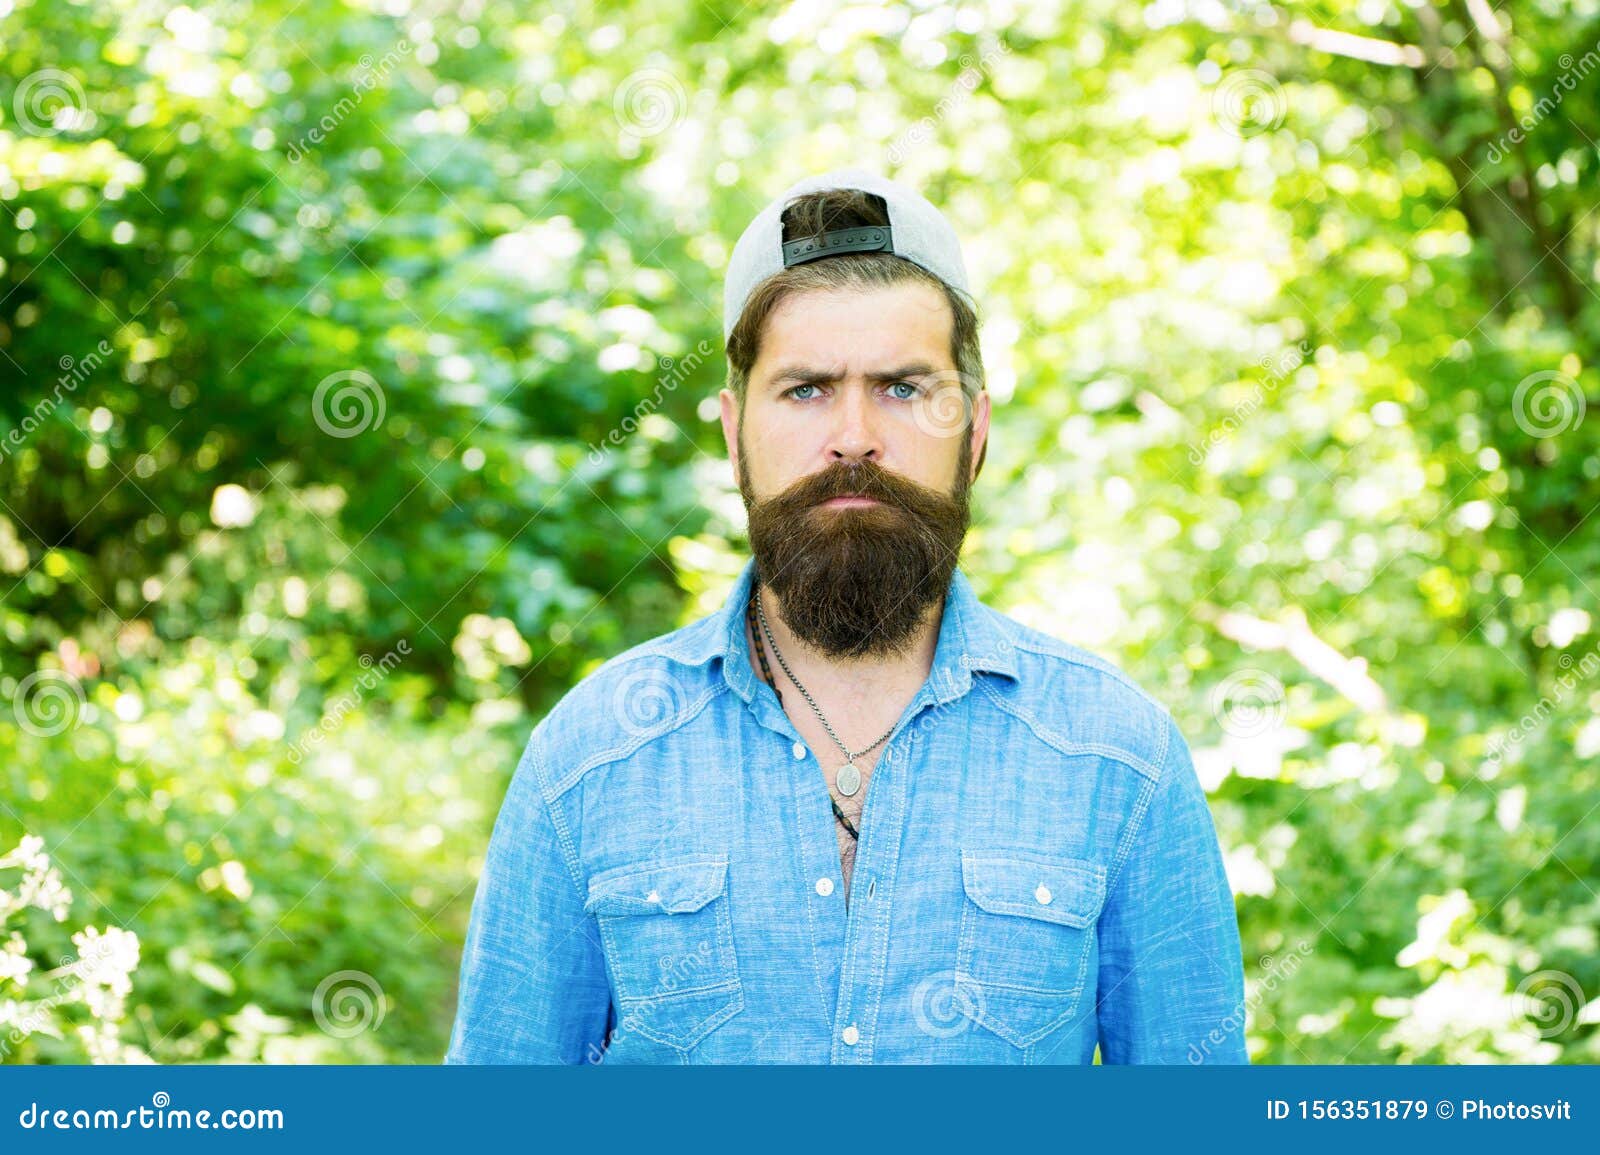 Go Green Think Fresh. Protect Nature Eco Movement. Man Handsome Bearded ...